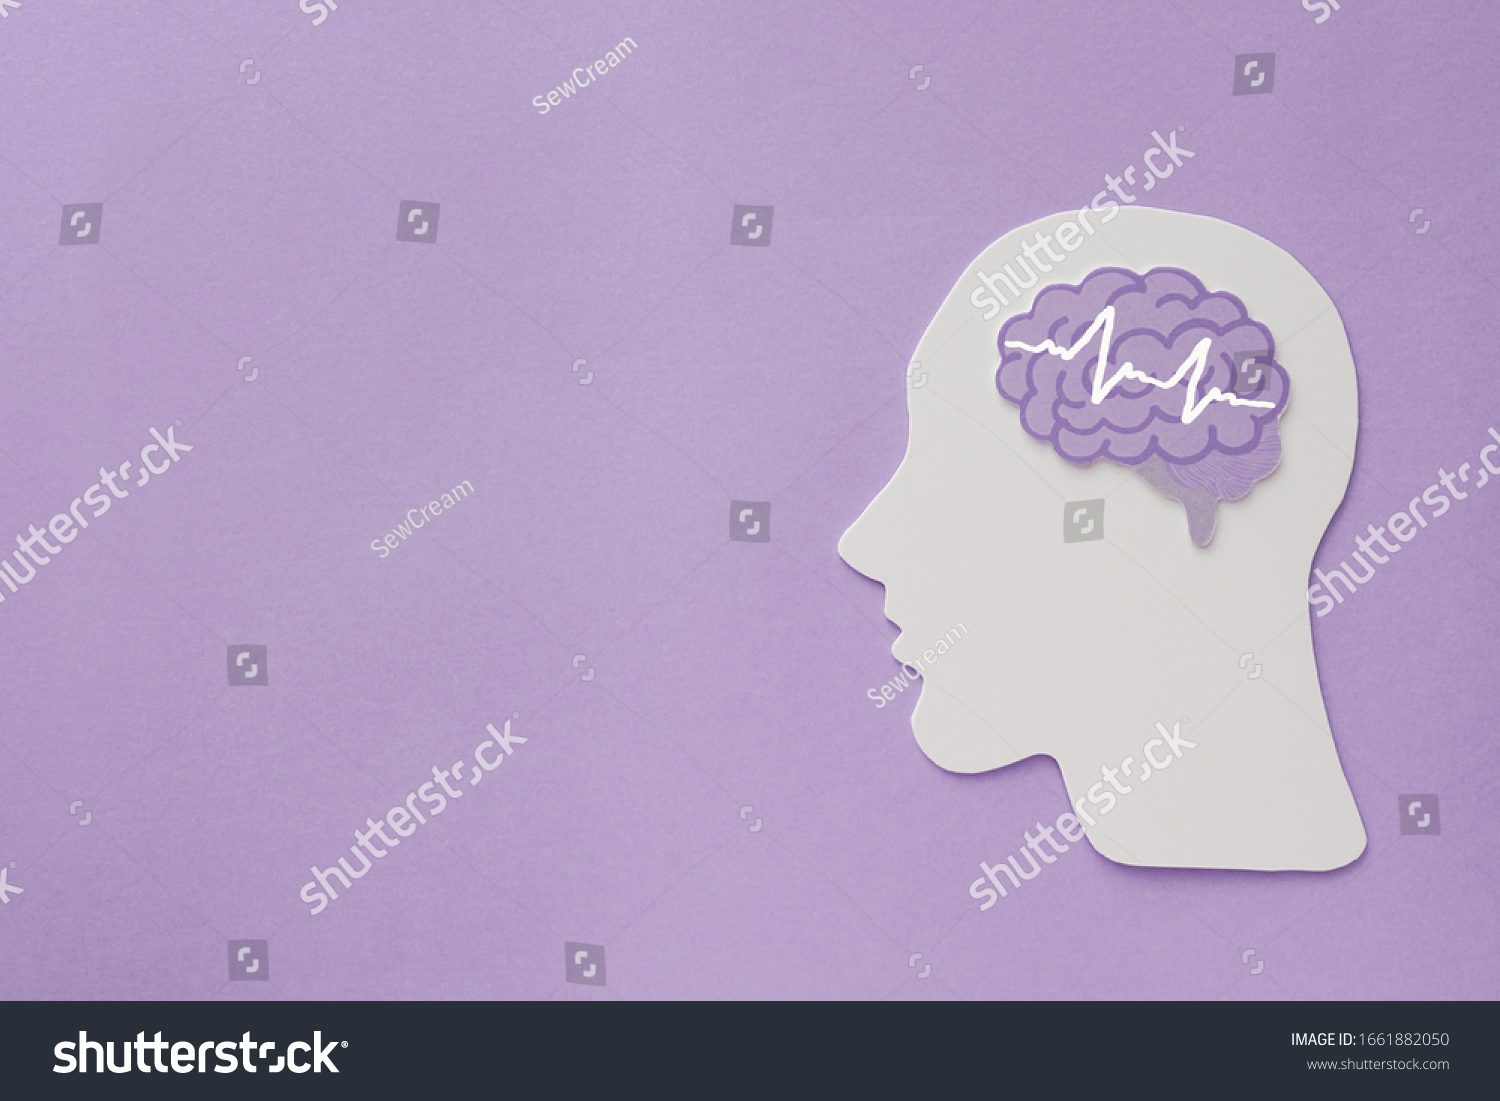 encephalography brain paper cutout on purple background,autism, Epilepsy and alzheimer awareness, seizure disorder, world mental health day concept #1661882050